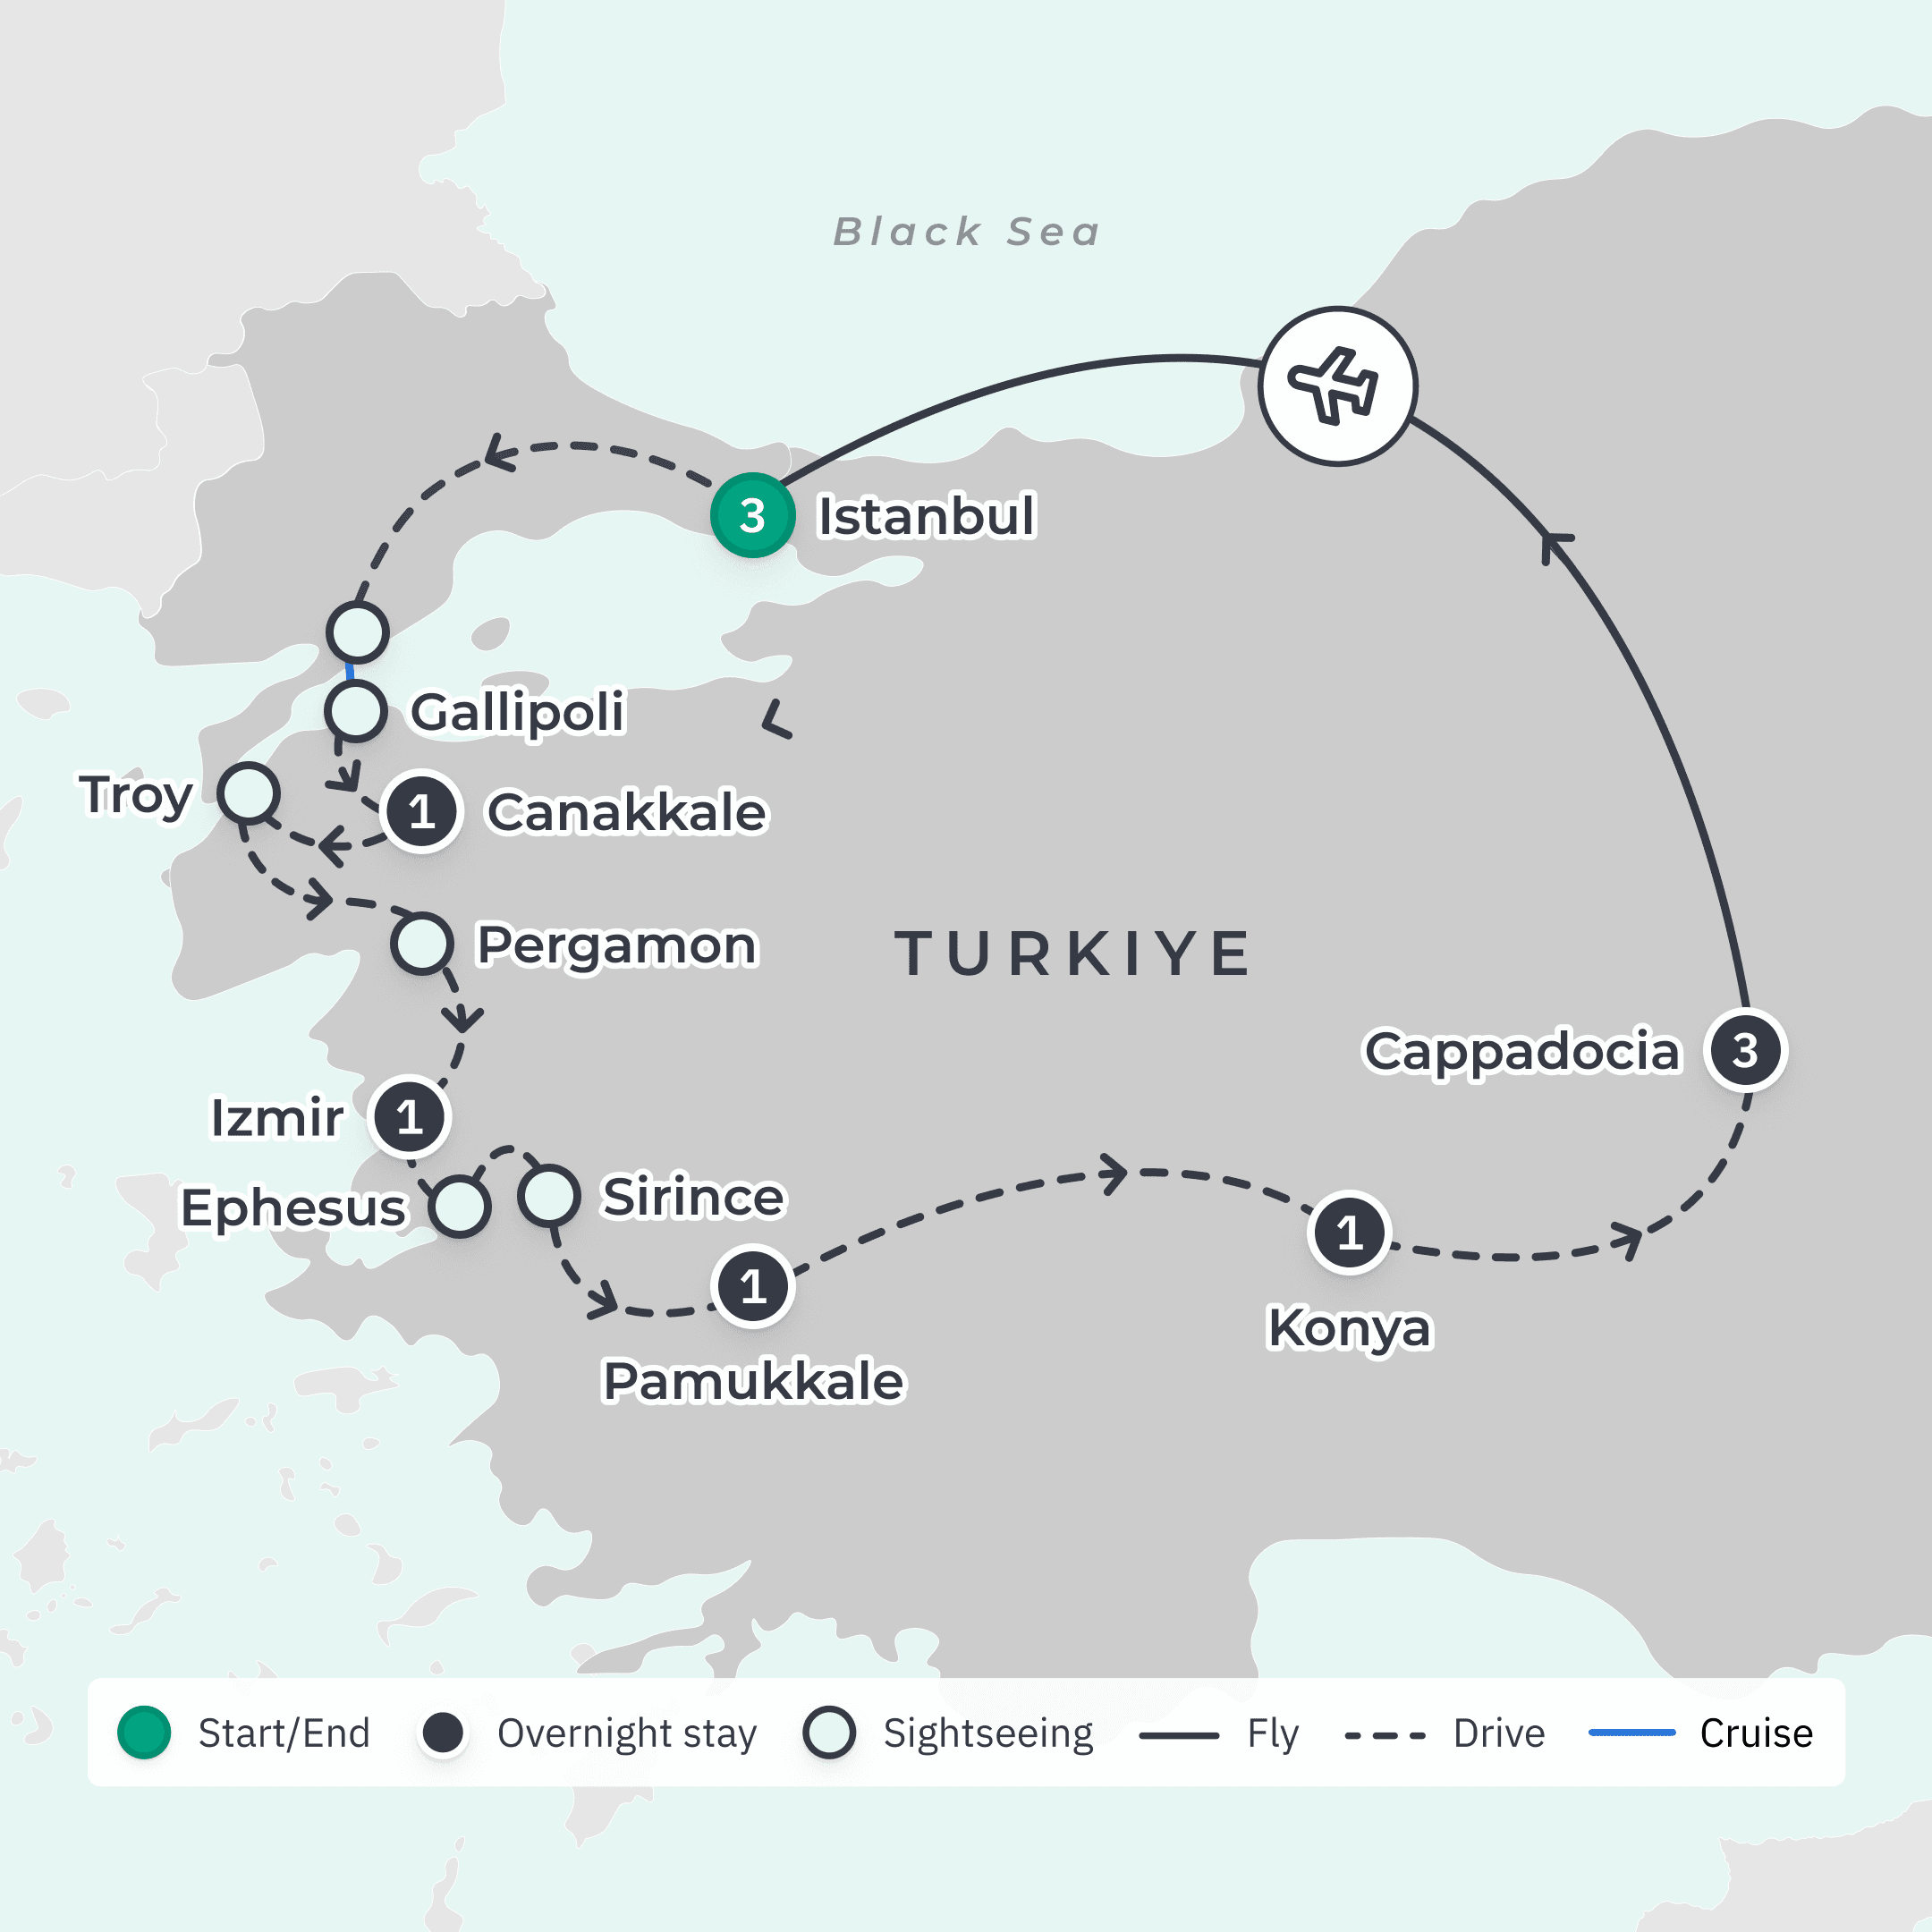 Turkiye Highlights with Cappadocia Cave Stay & Gallipoli Visit route map